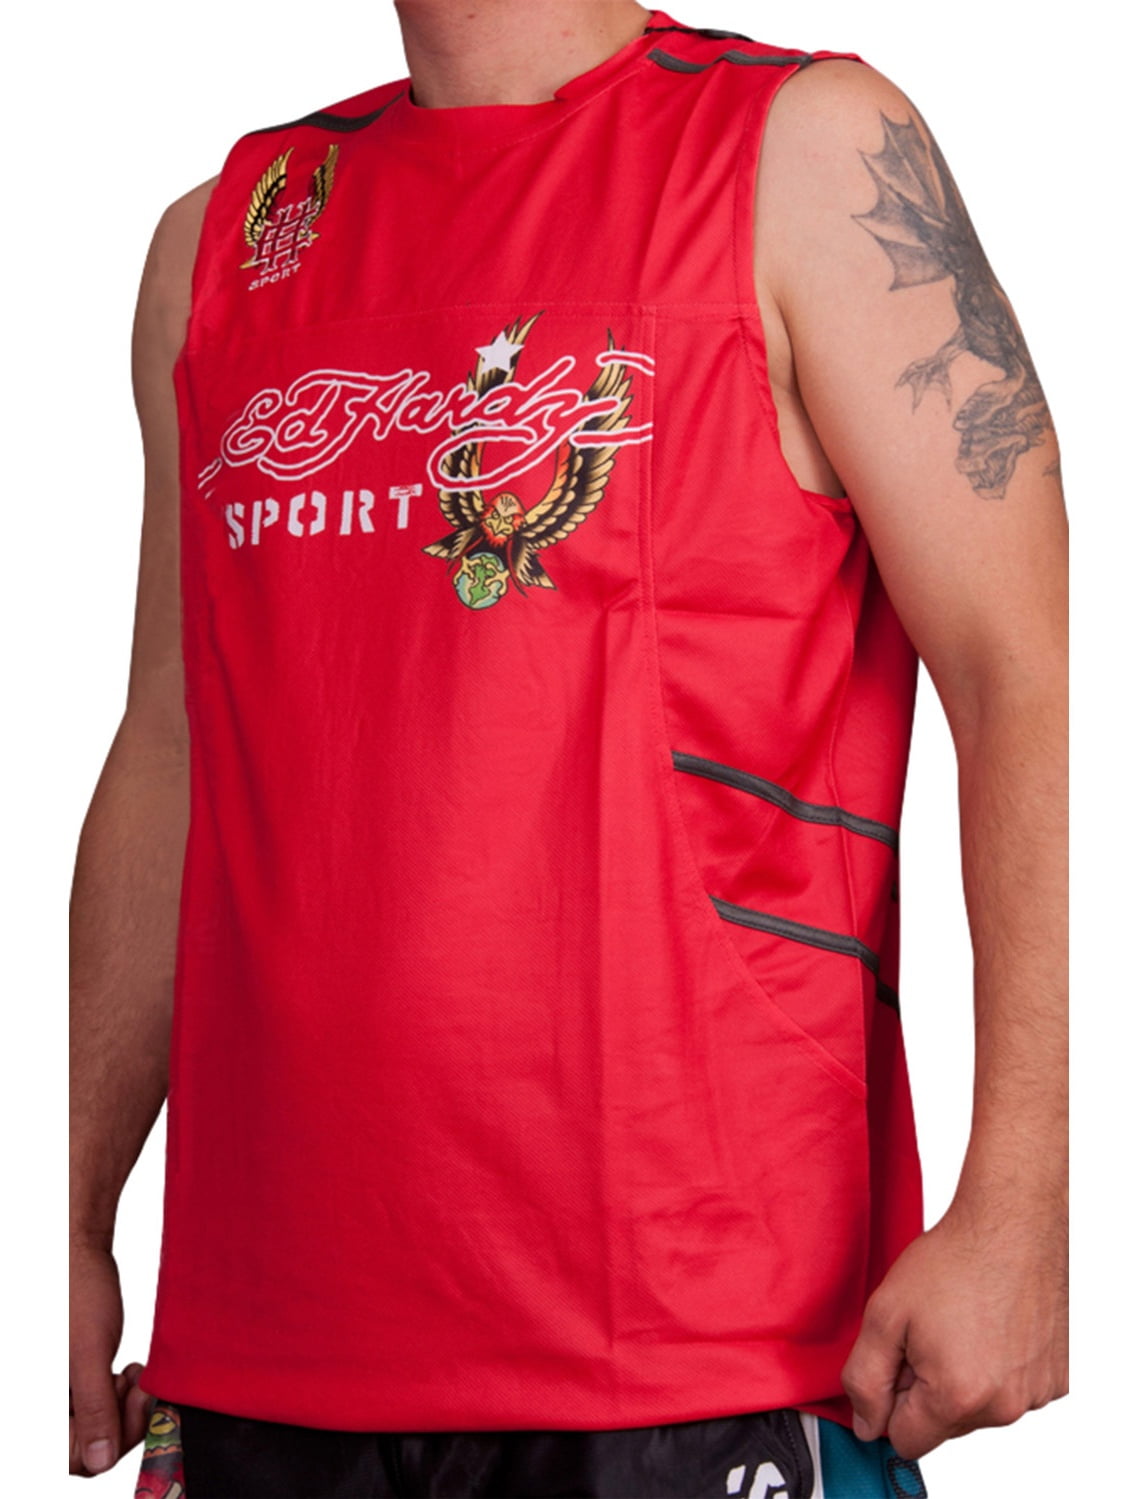 Ed Hardy Mens Eagle Sport Tank Top - Red - Small